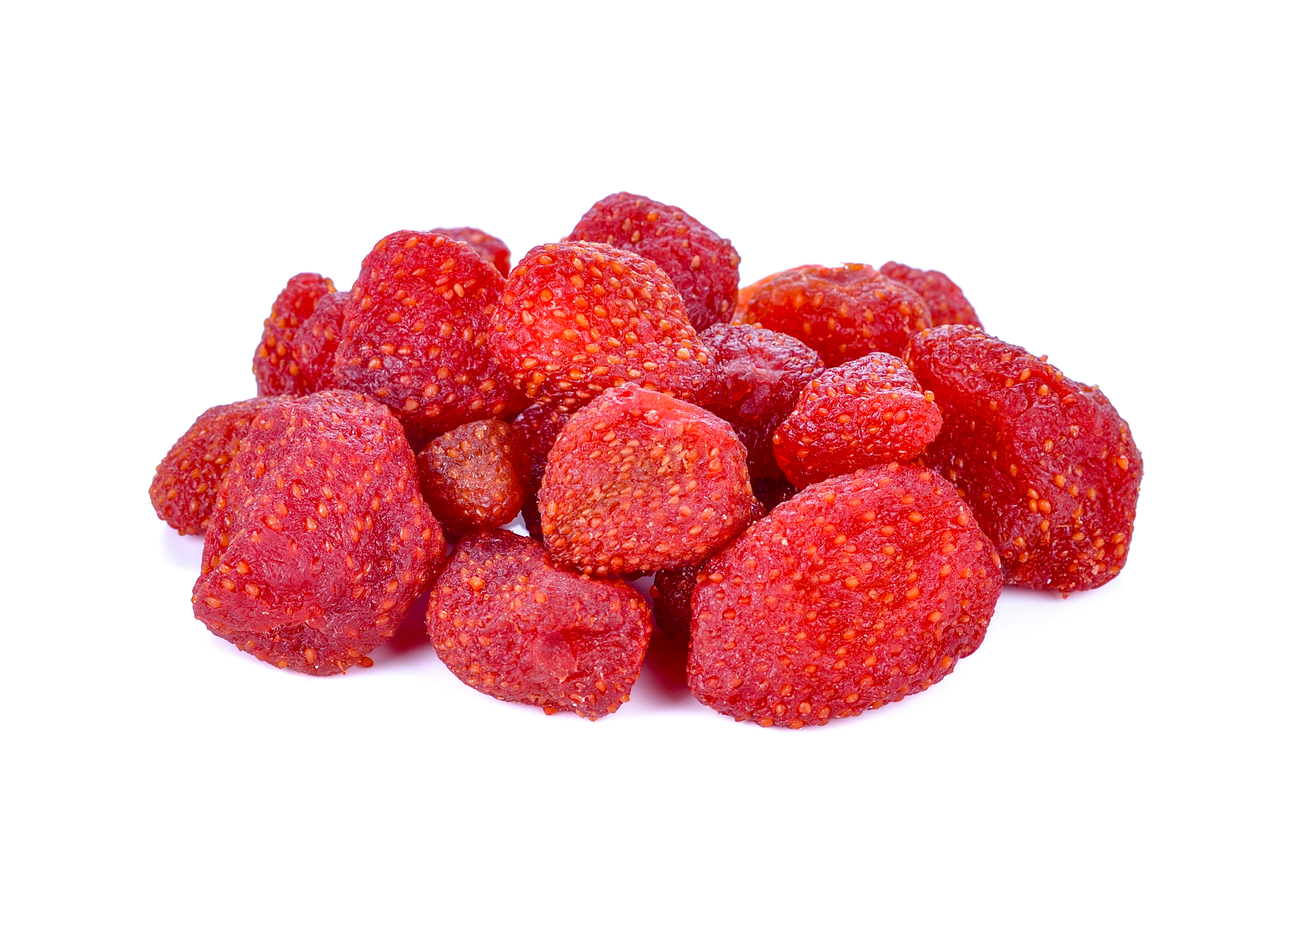 Buy Dried Strawberries 1 Lb 454 G Bag Dehydrated Strawberries